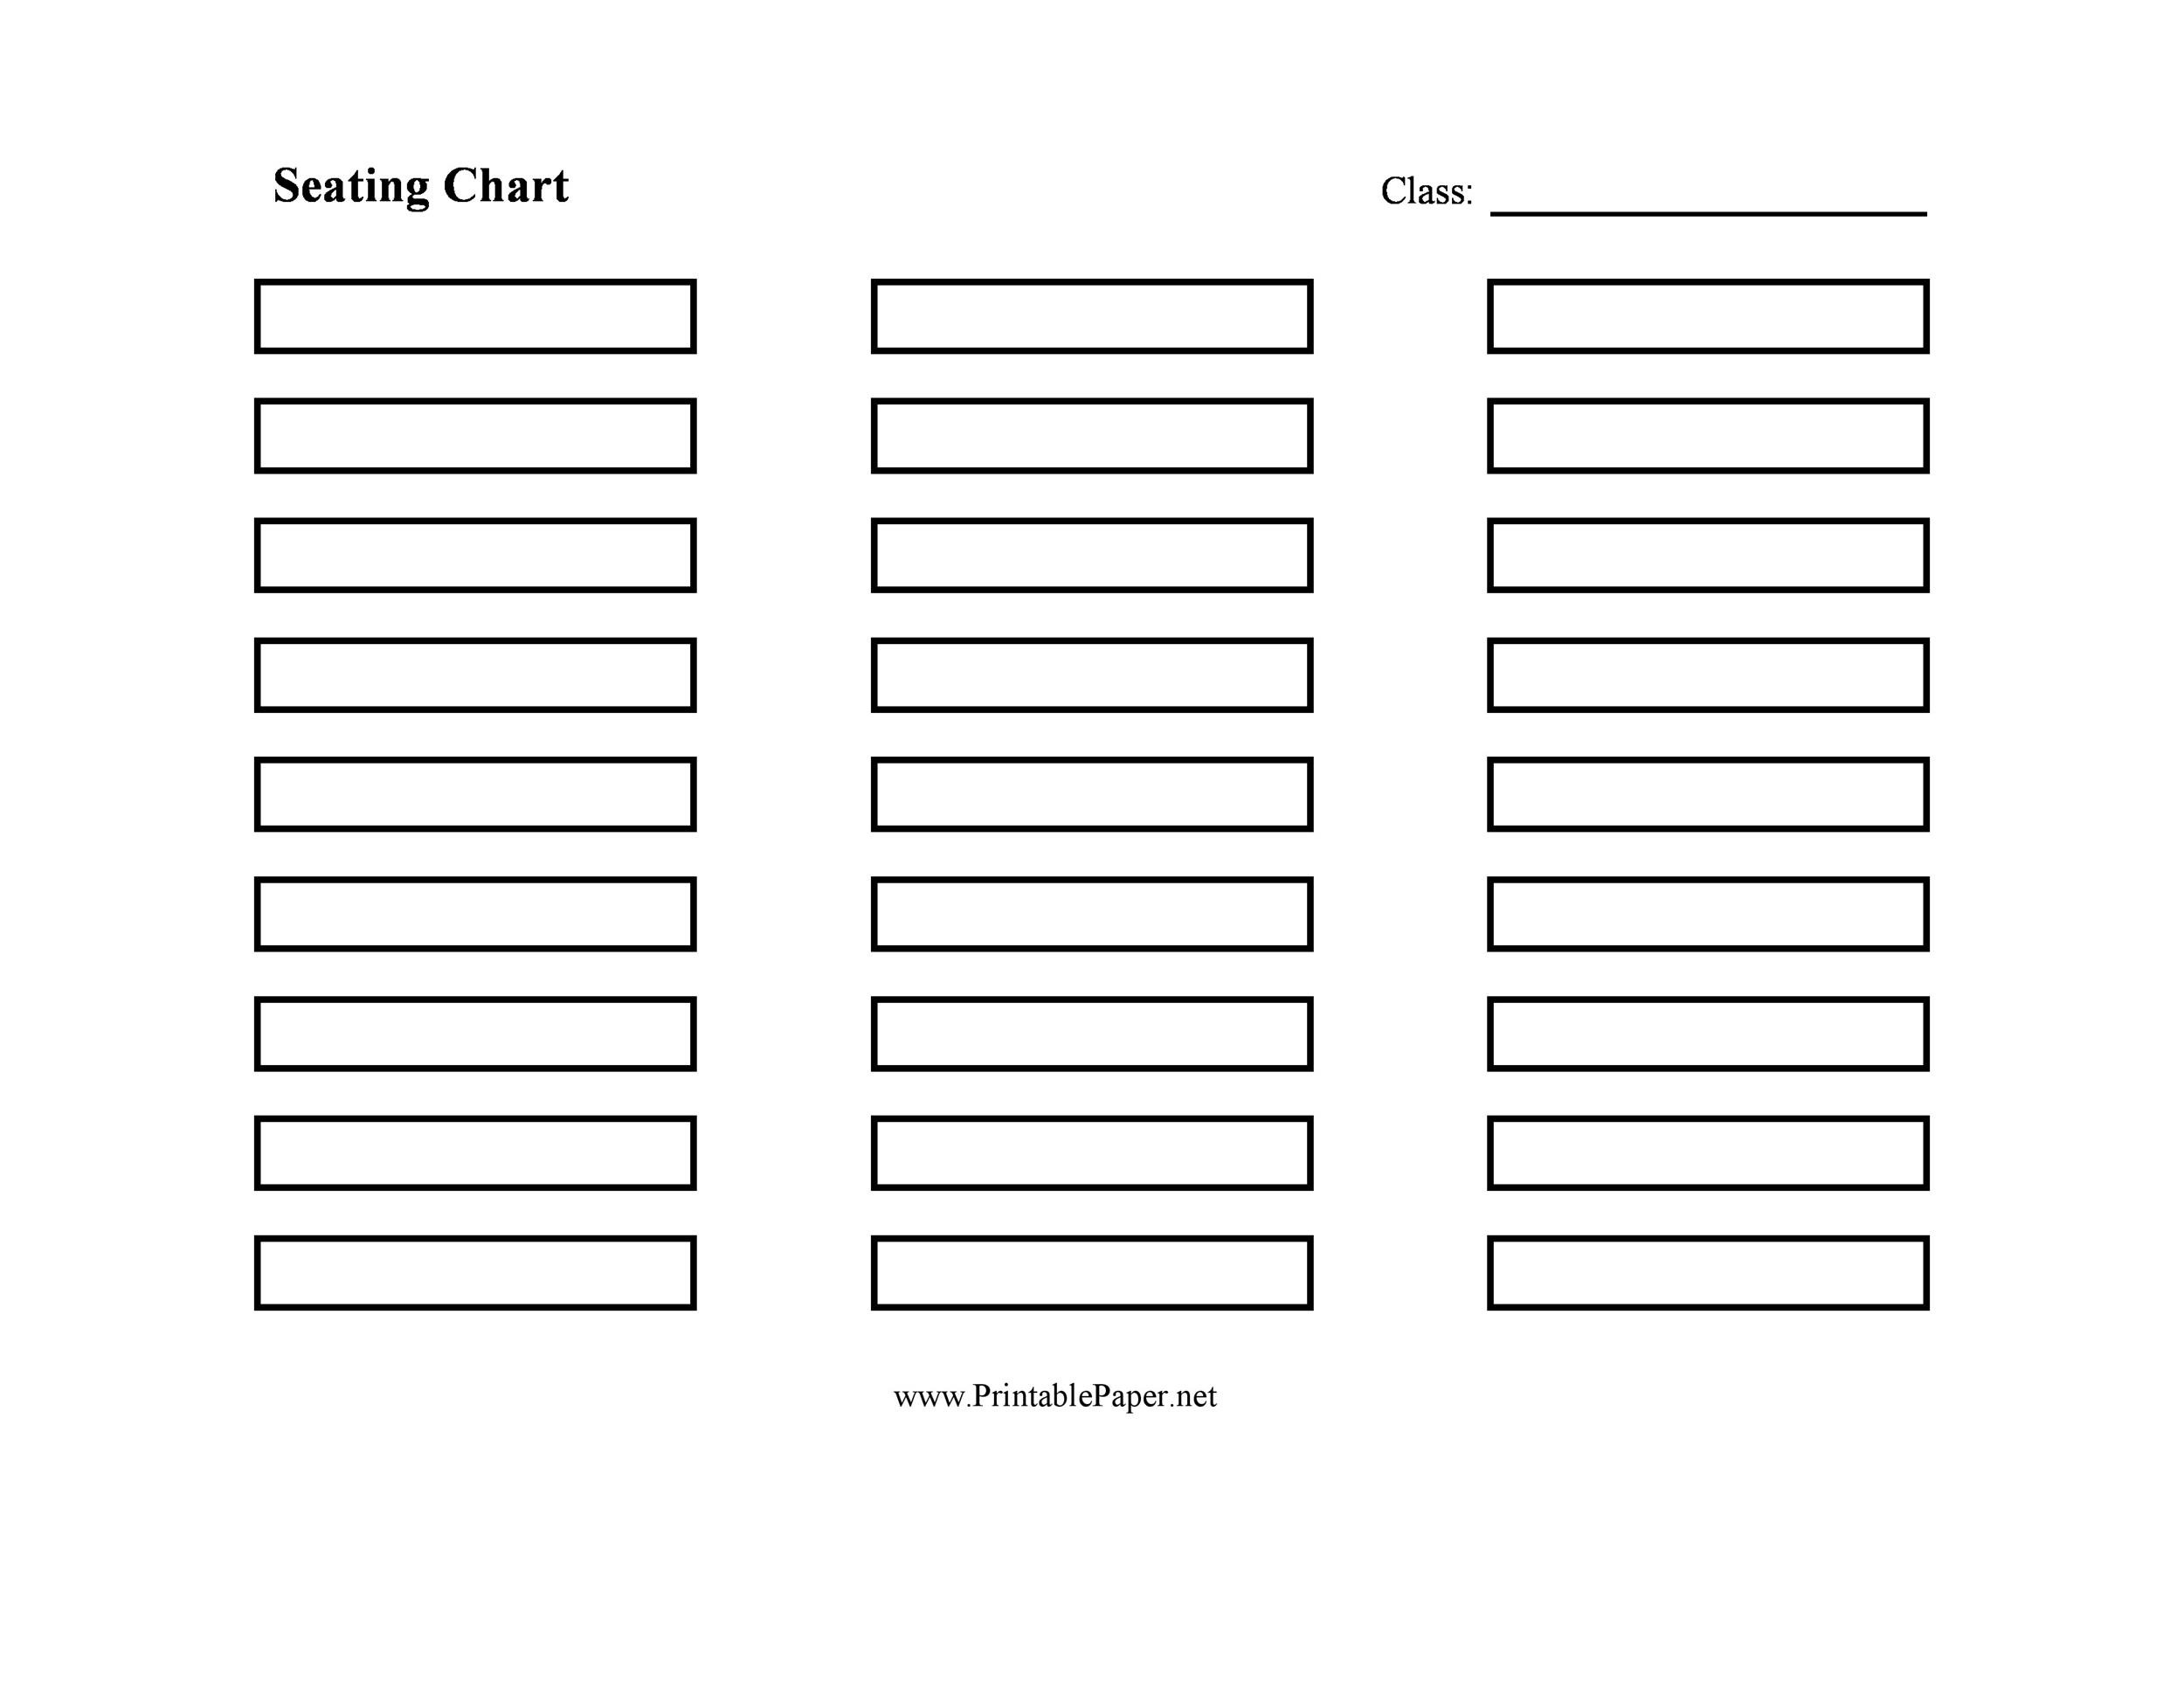 40 Great Seating Chart Templates Wedding Classroom More 